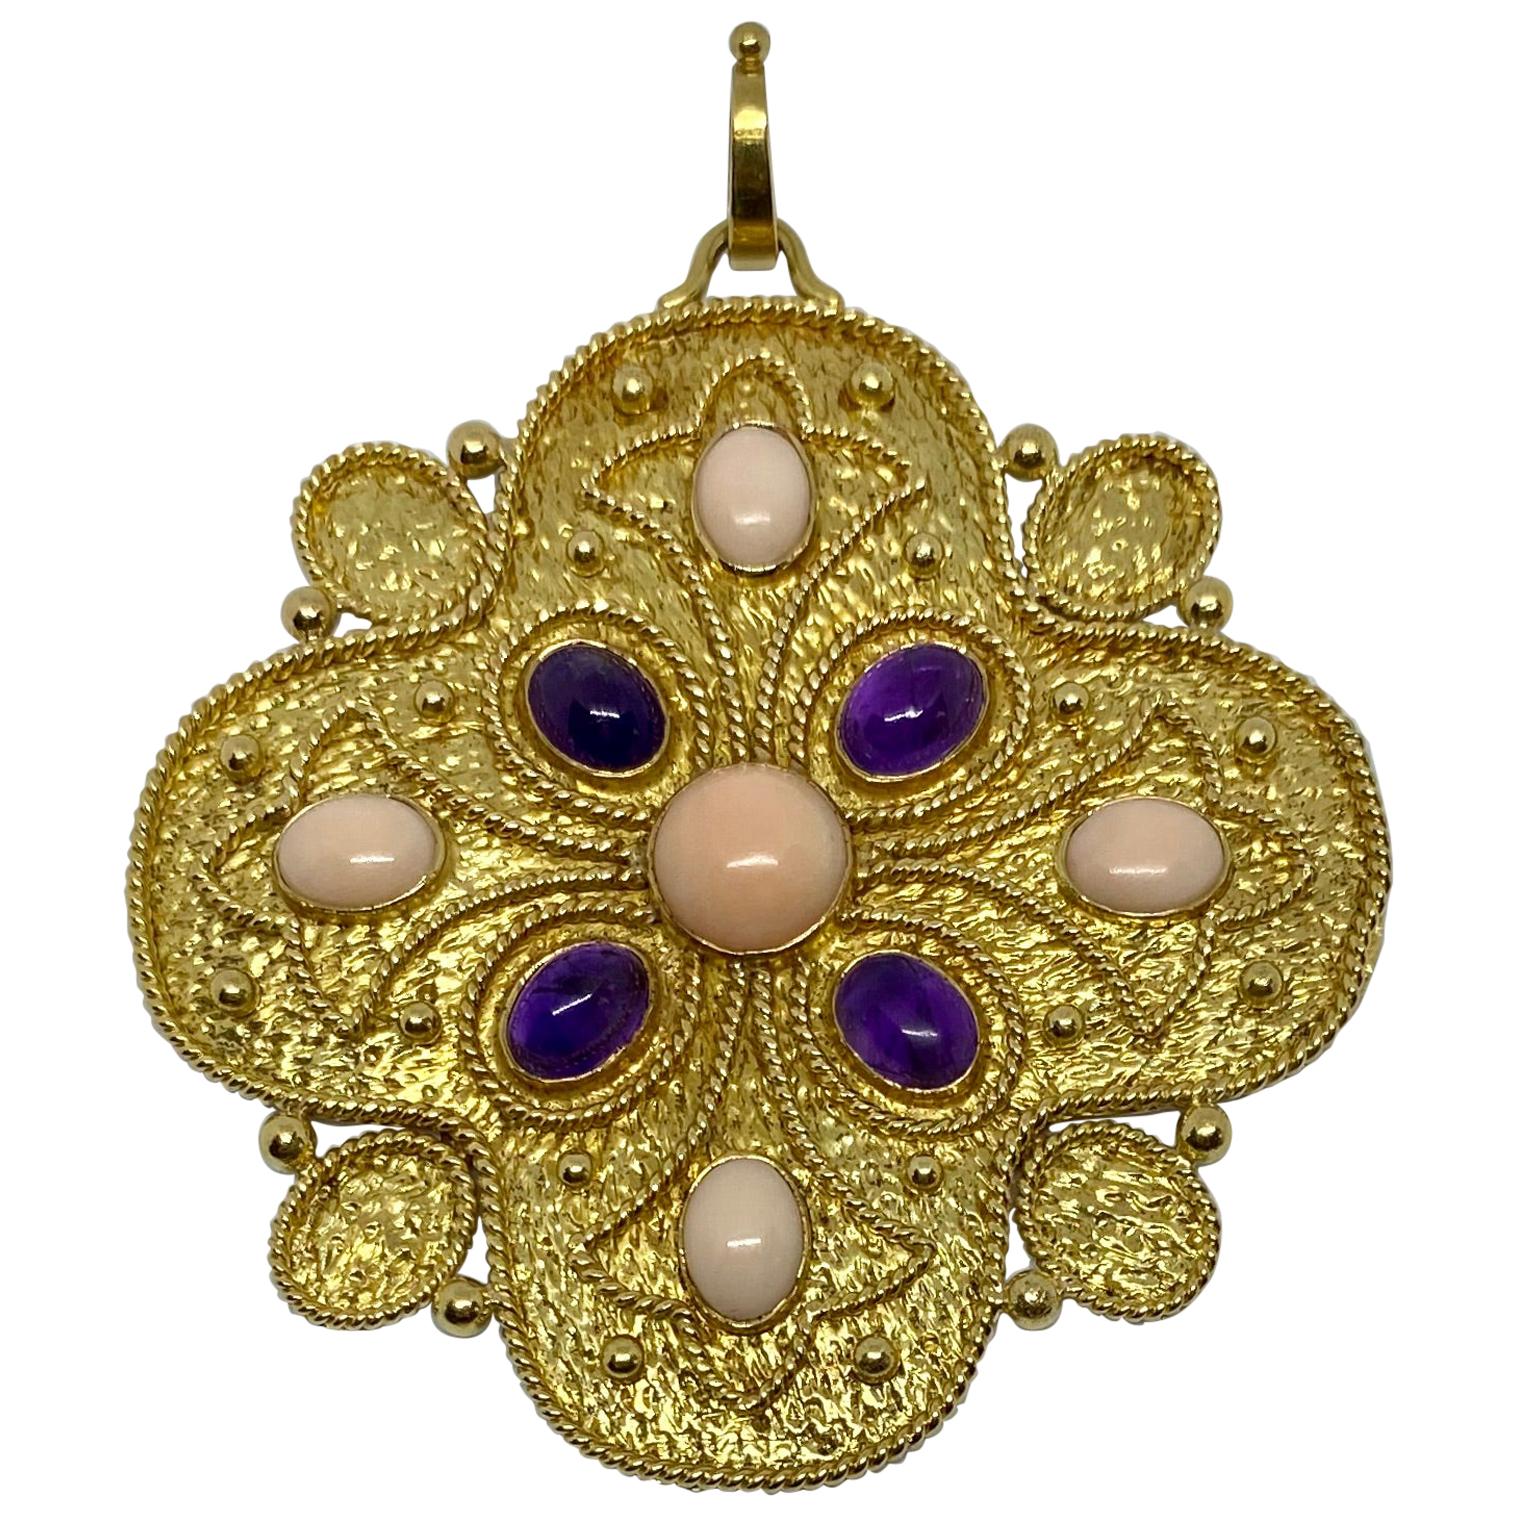 Vintage 1960s Pendant in Gold, Coral and Amethyst by Vourakis